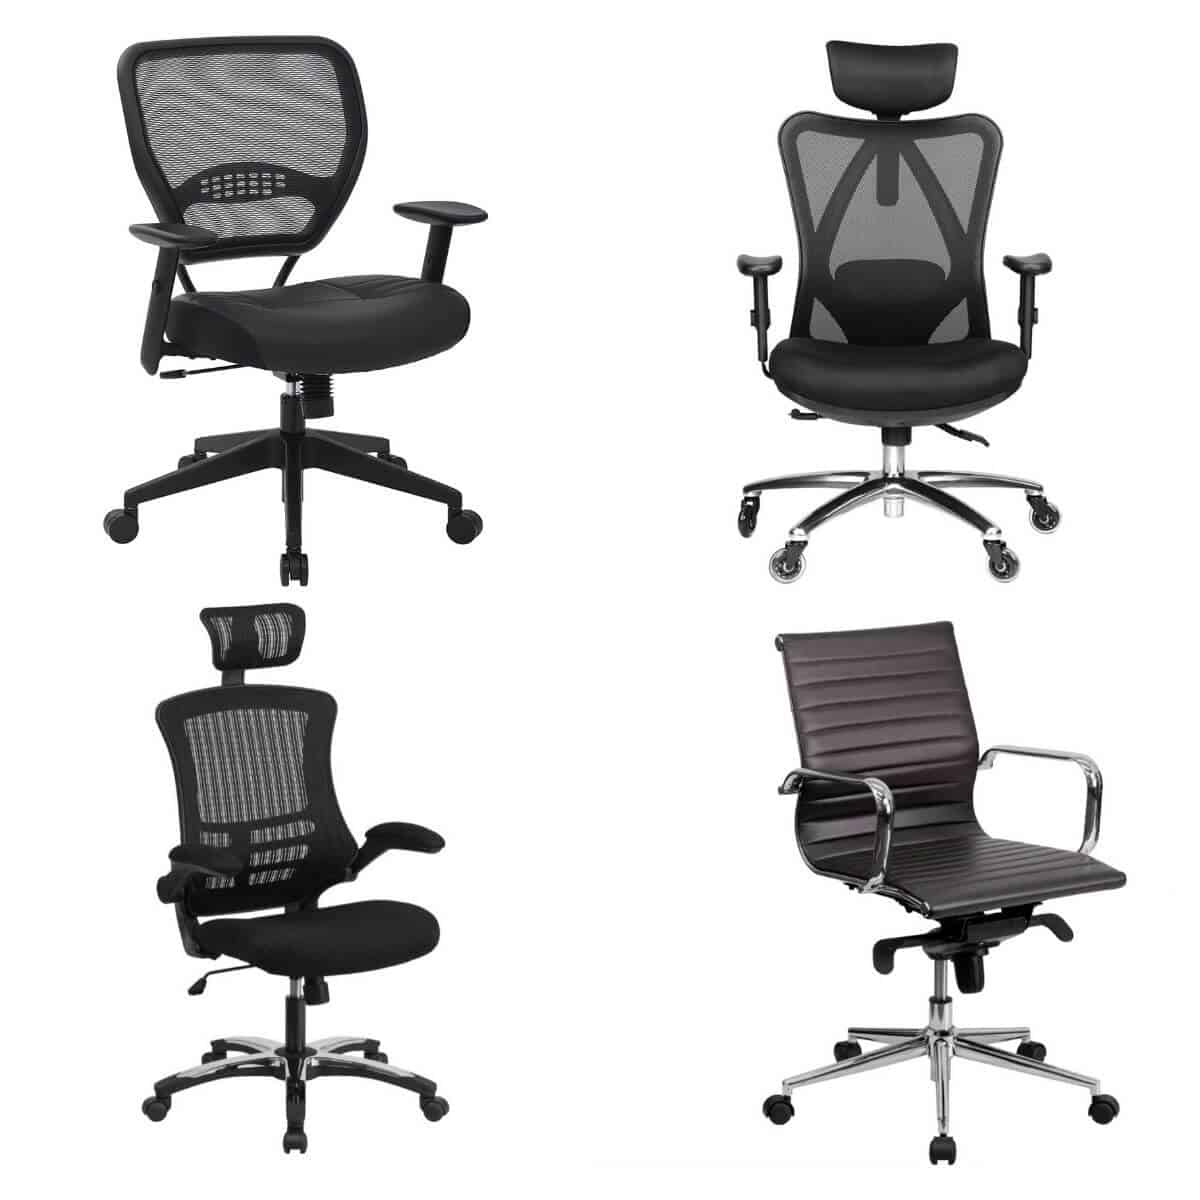 Four black home office chairs.